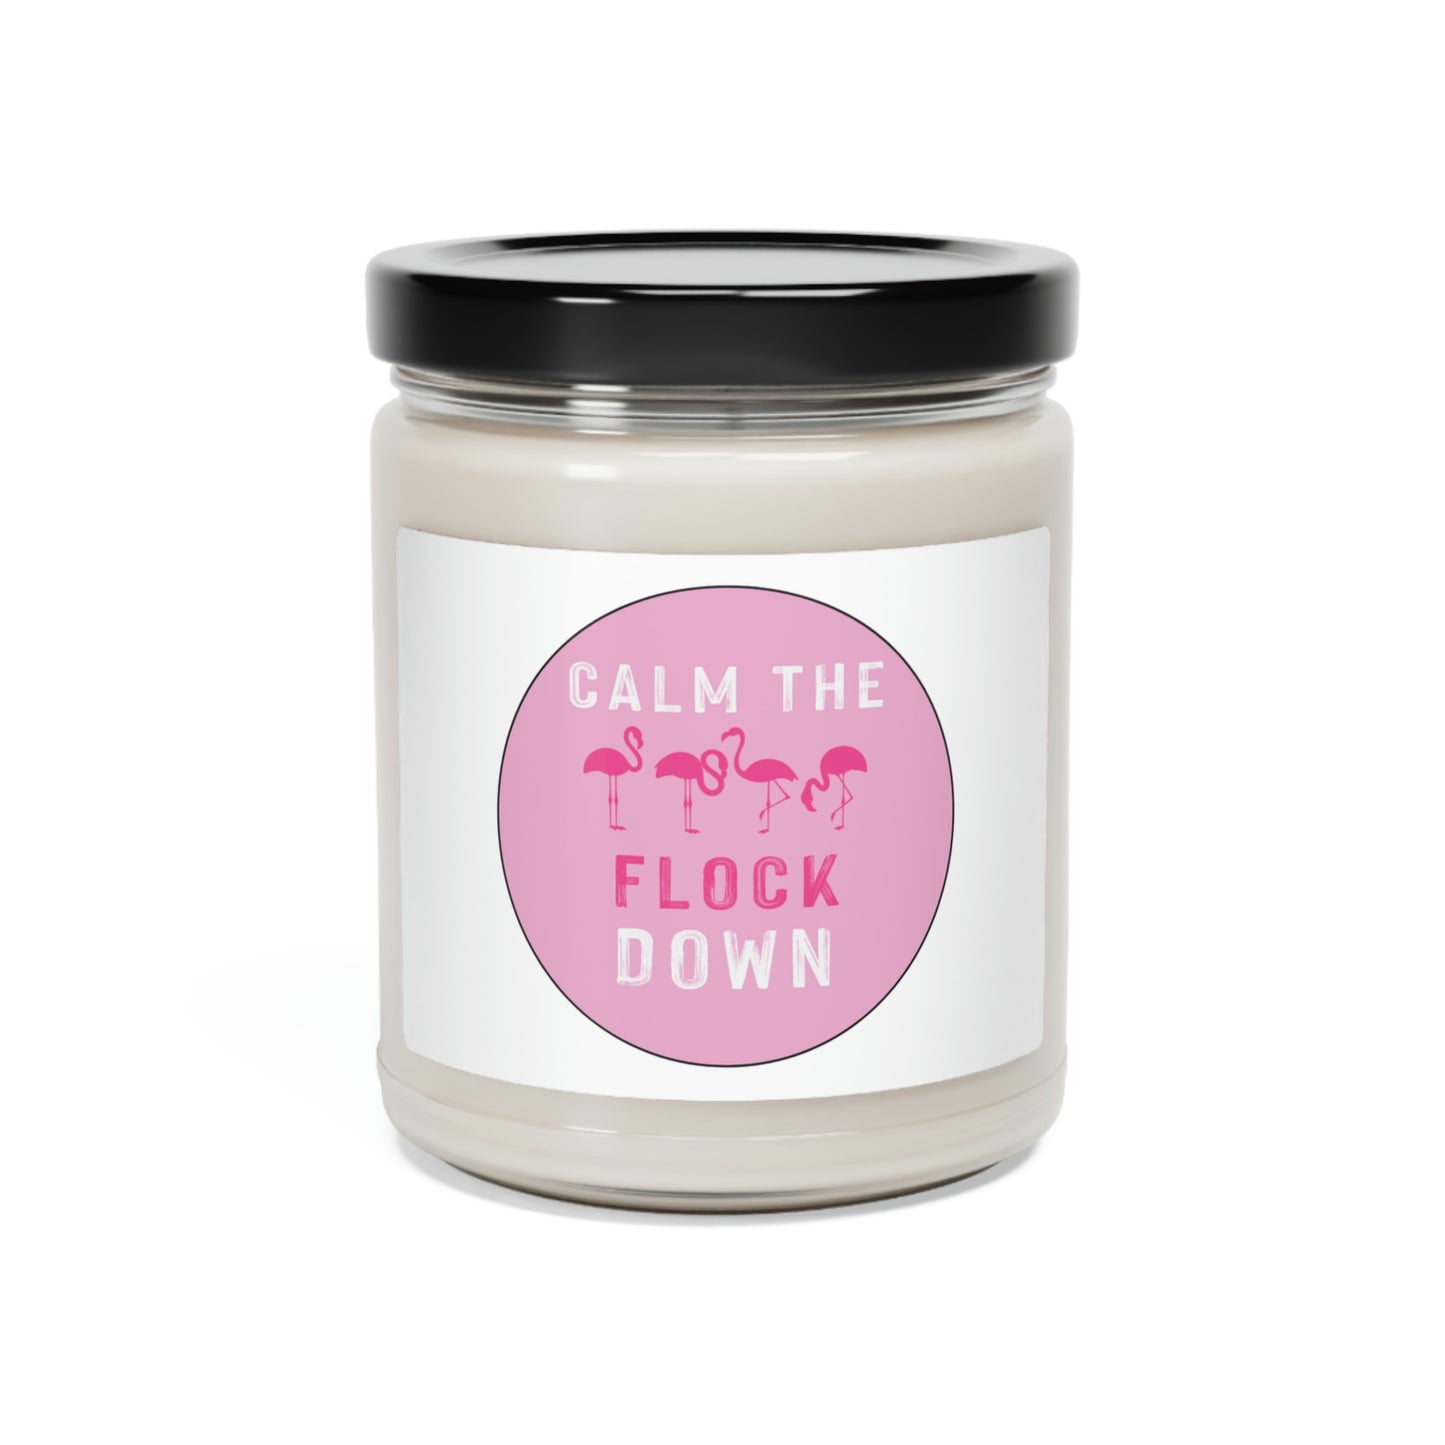 Calm the Flock DownScented Soy Candle, 9oz